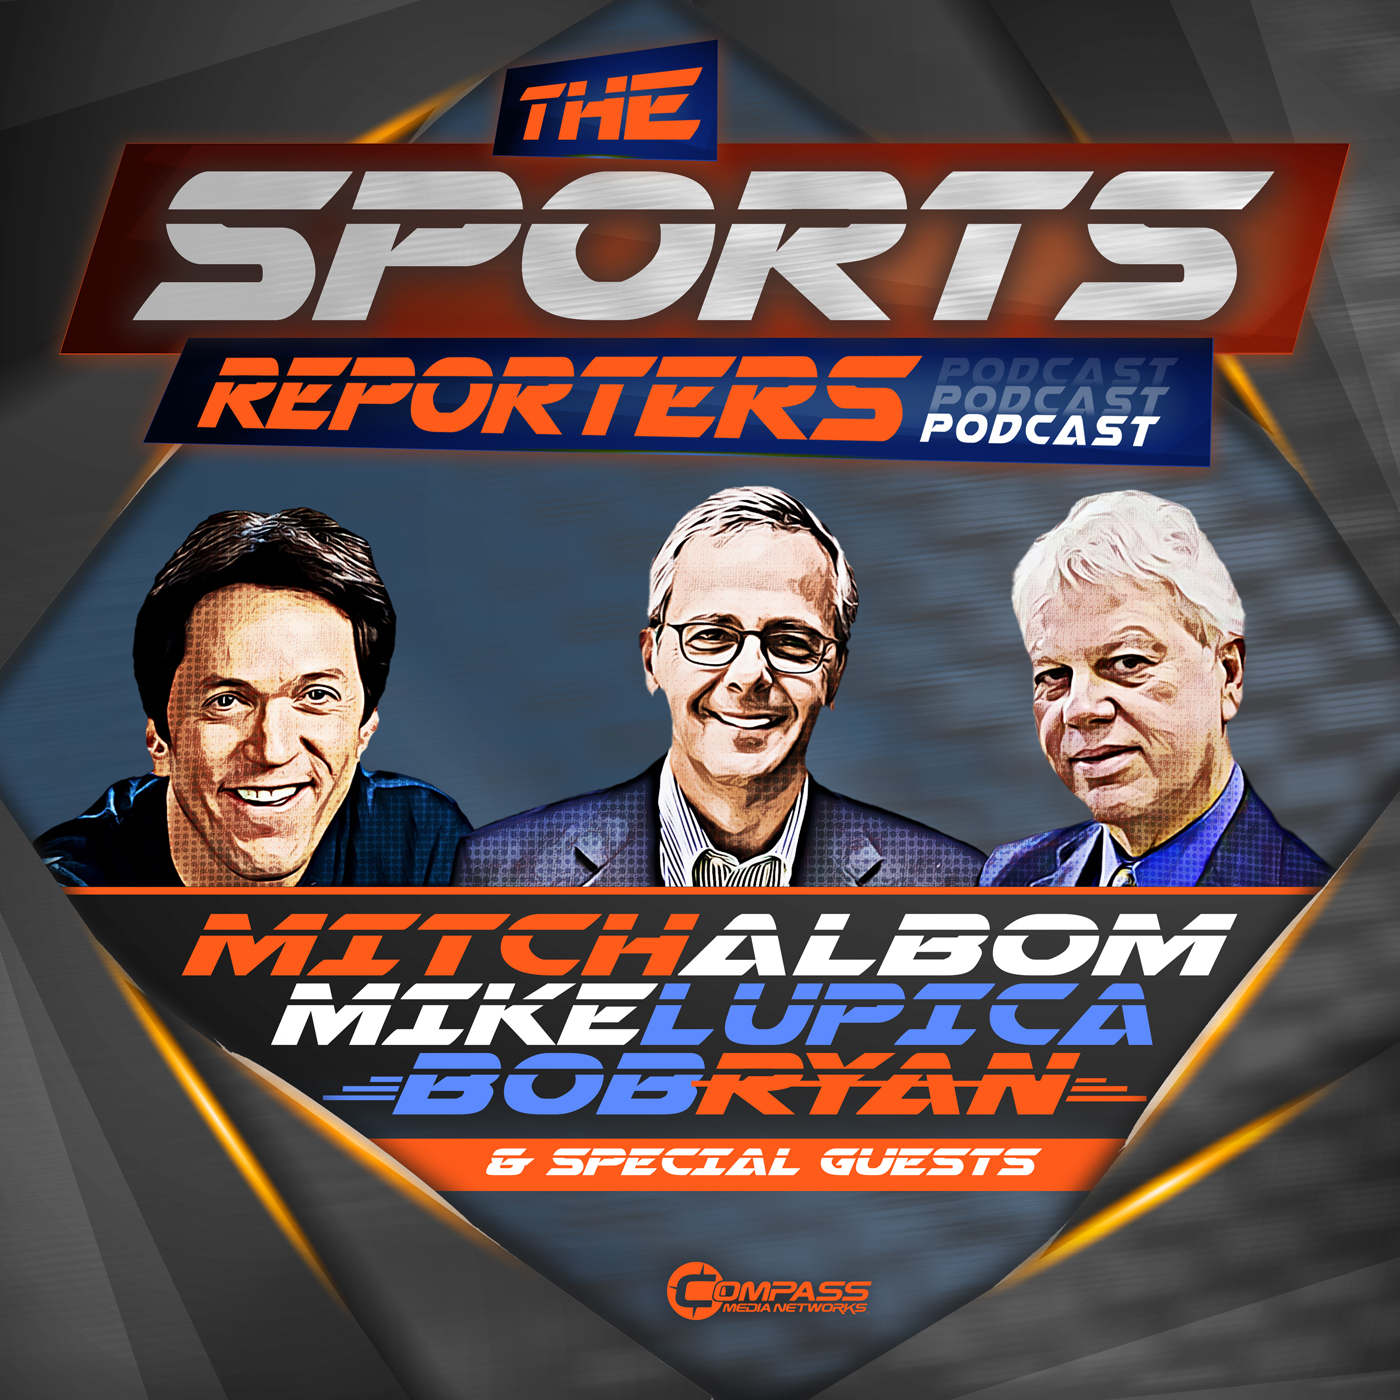 The Sports Reporters - Episode 300 - MLB Opening Weekend Storylines. NCAA's Procrastination Approach. Lou Breaks the Bubble